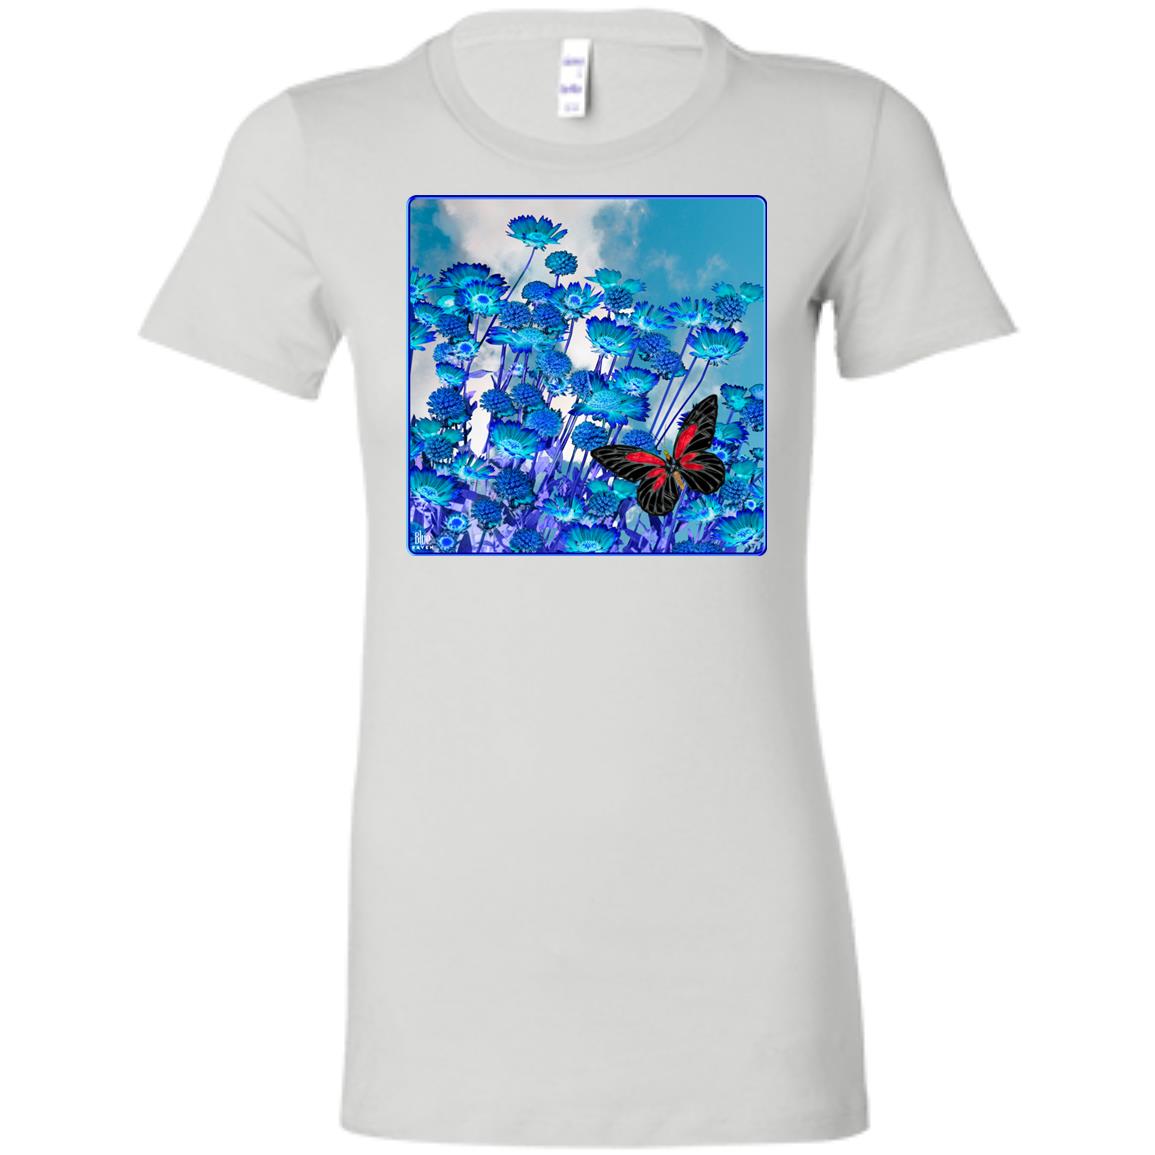 Blue Daisies - Women's Fitted T-Shirt